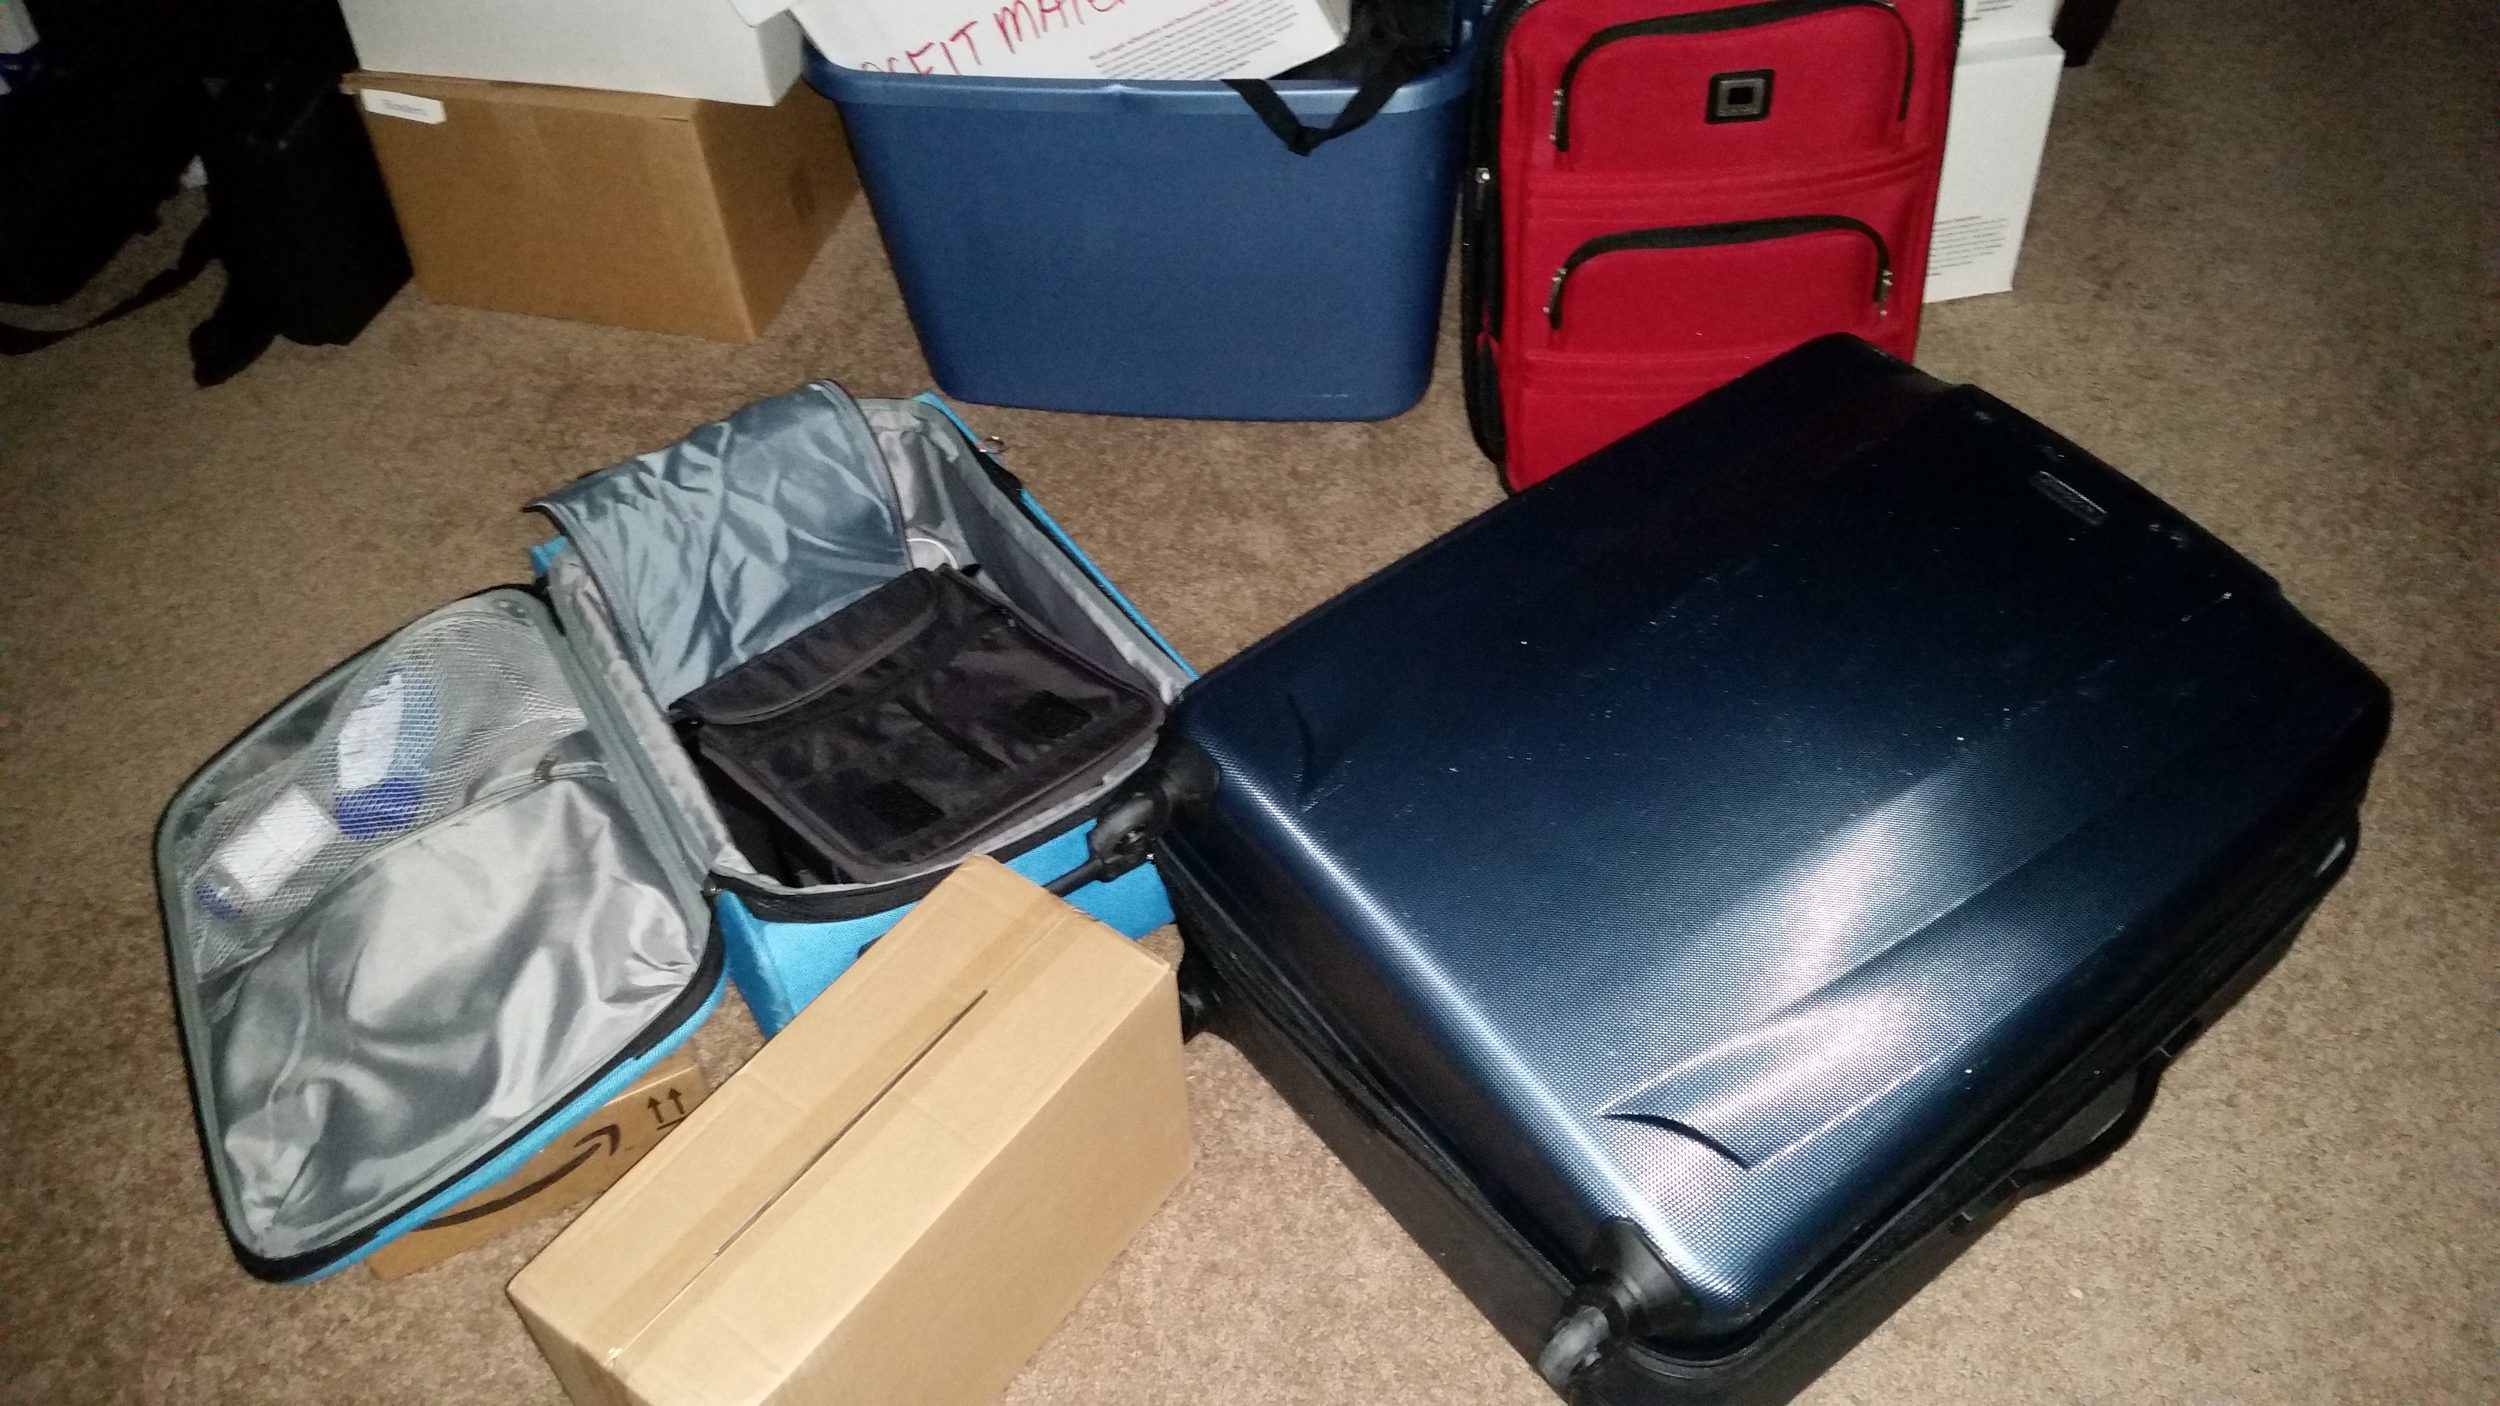 Several Suitcases on Carpet